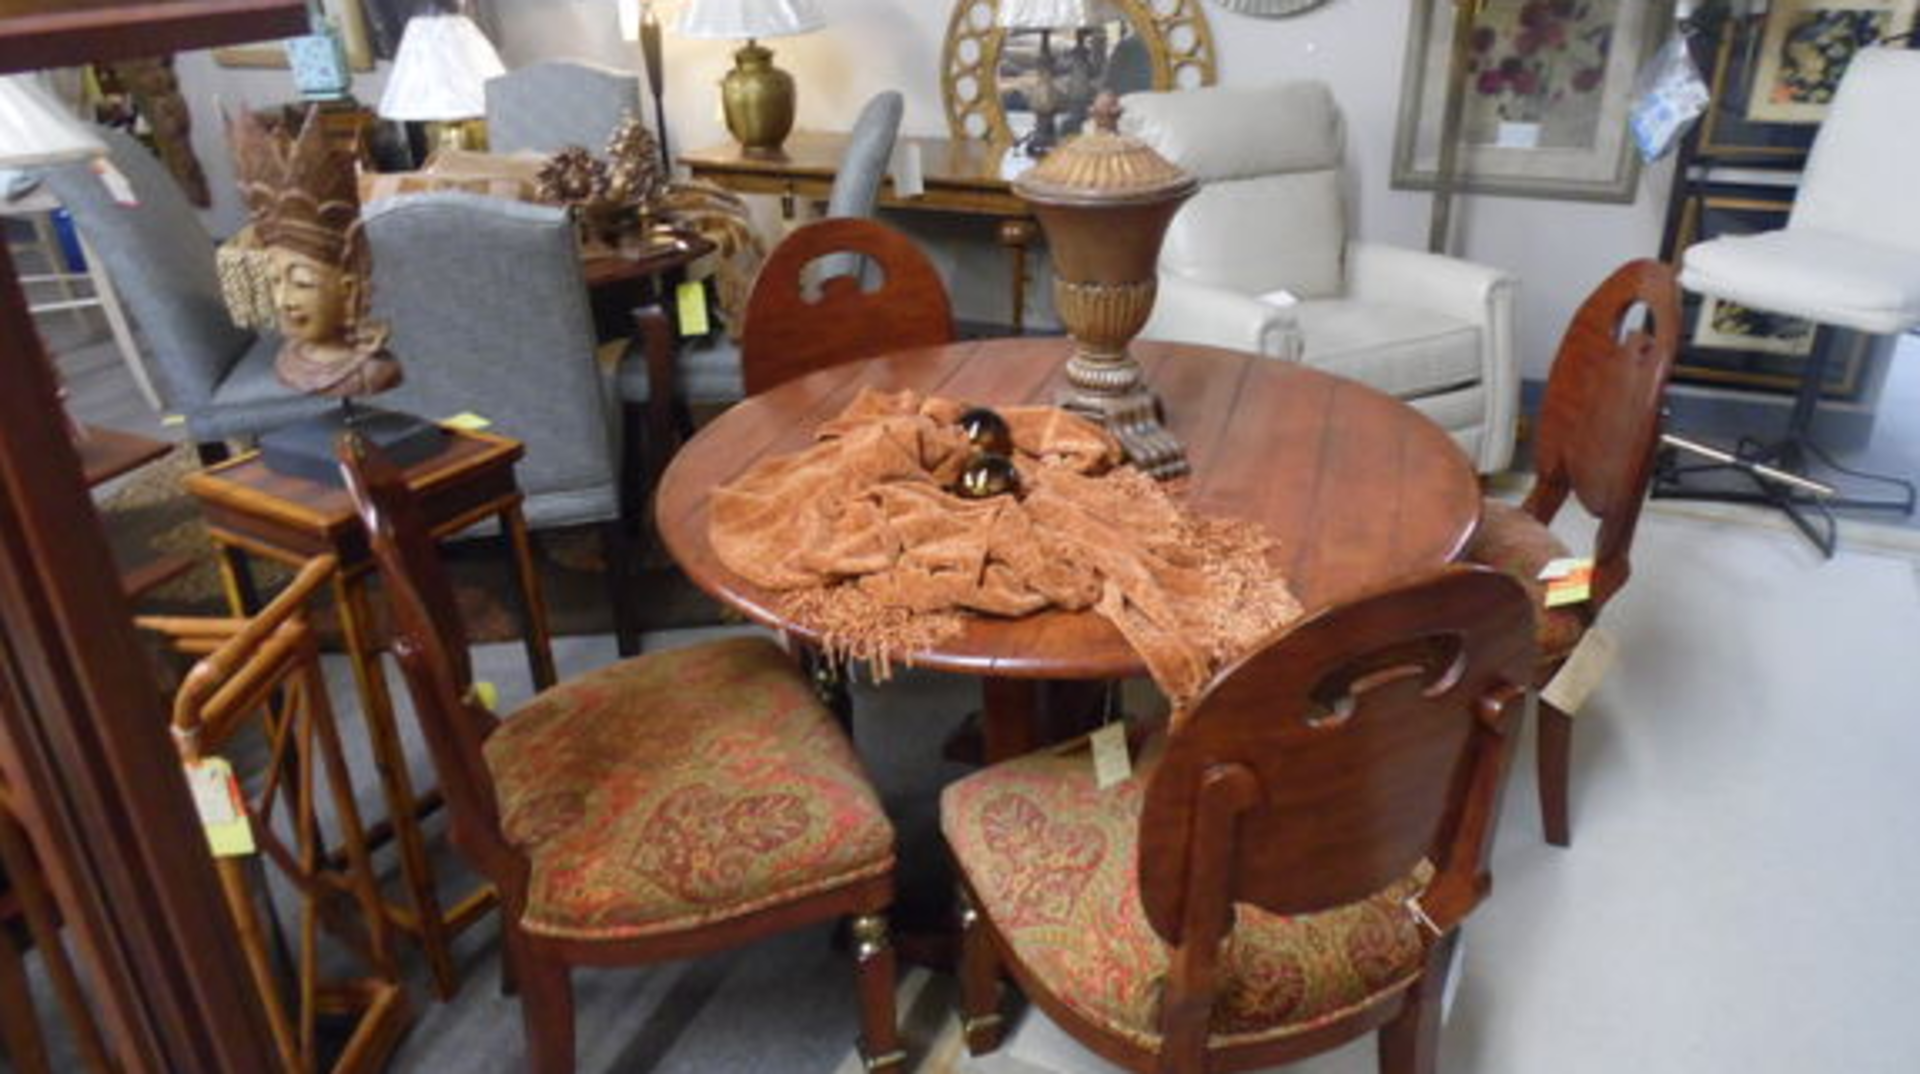 CLICK HERE FOR PREVIEW - Furniture & Decor Items Auction - Image 2 of 5